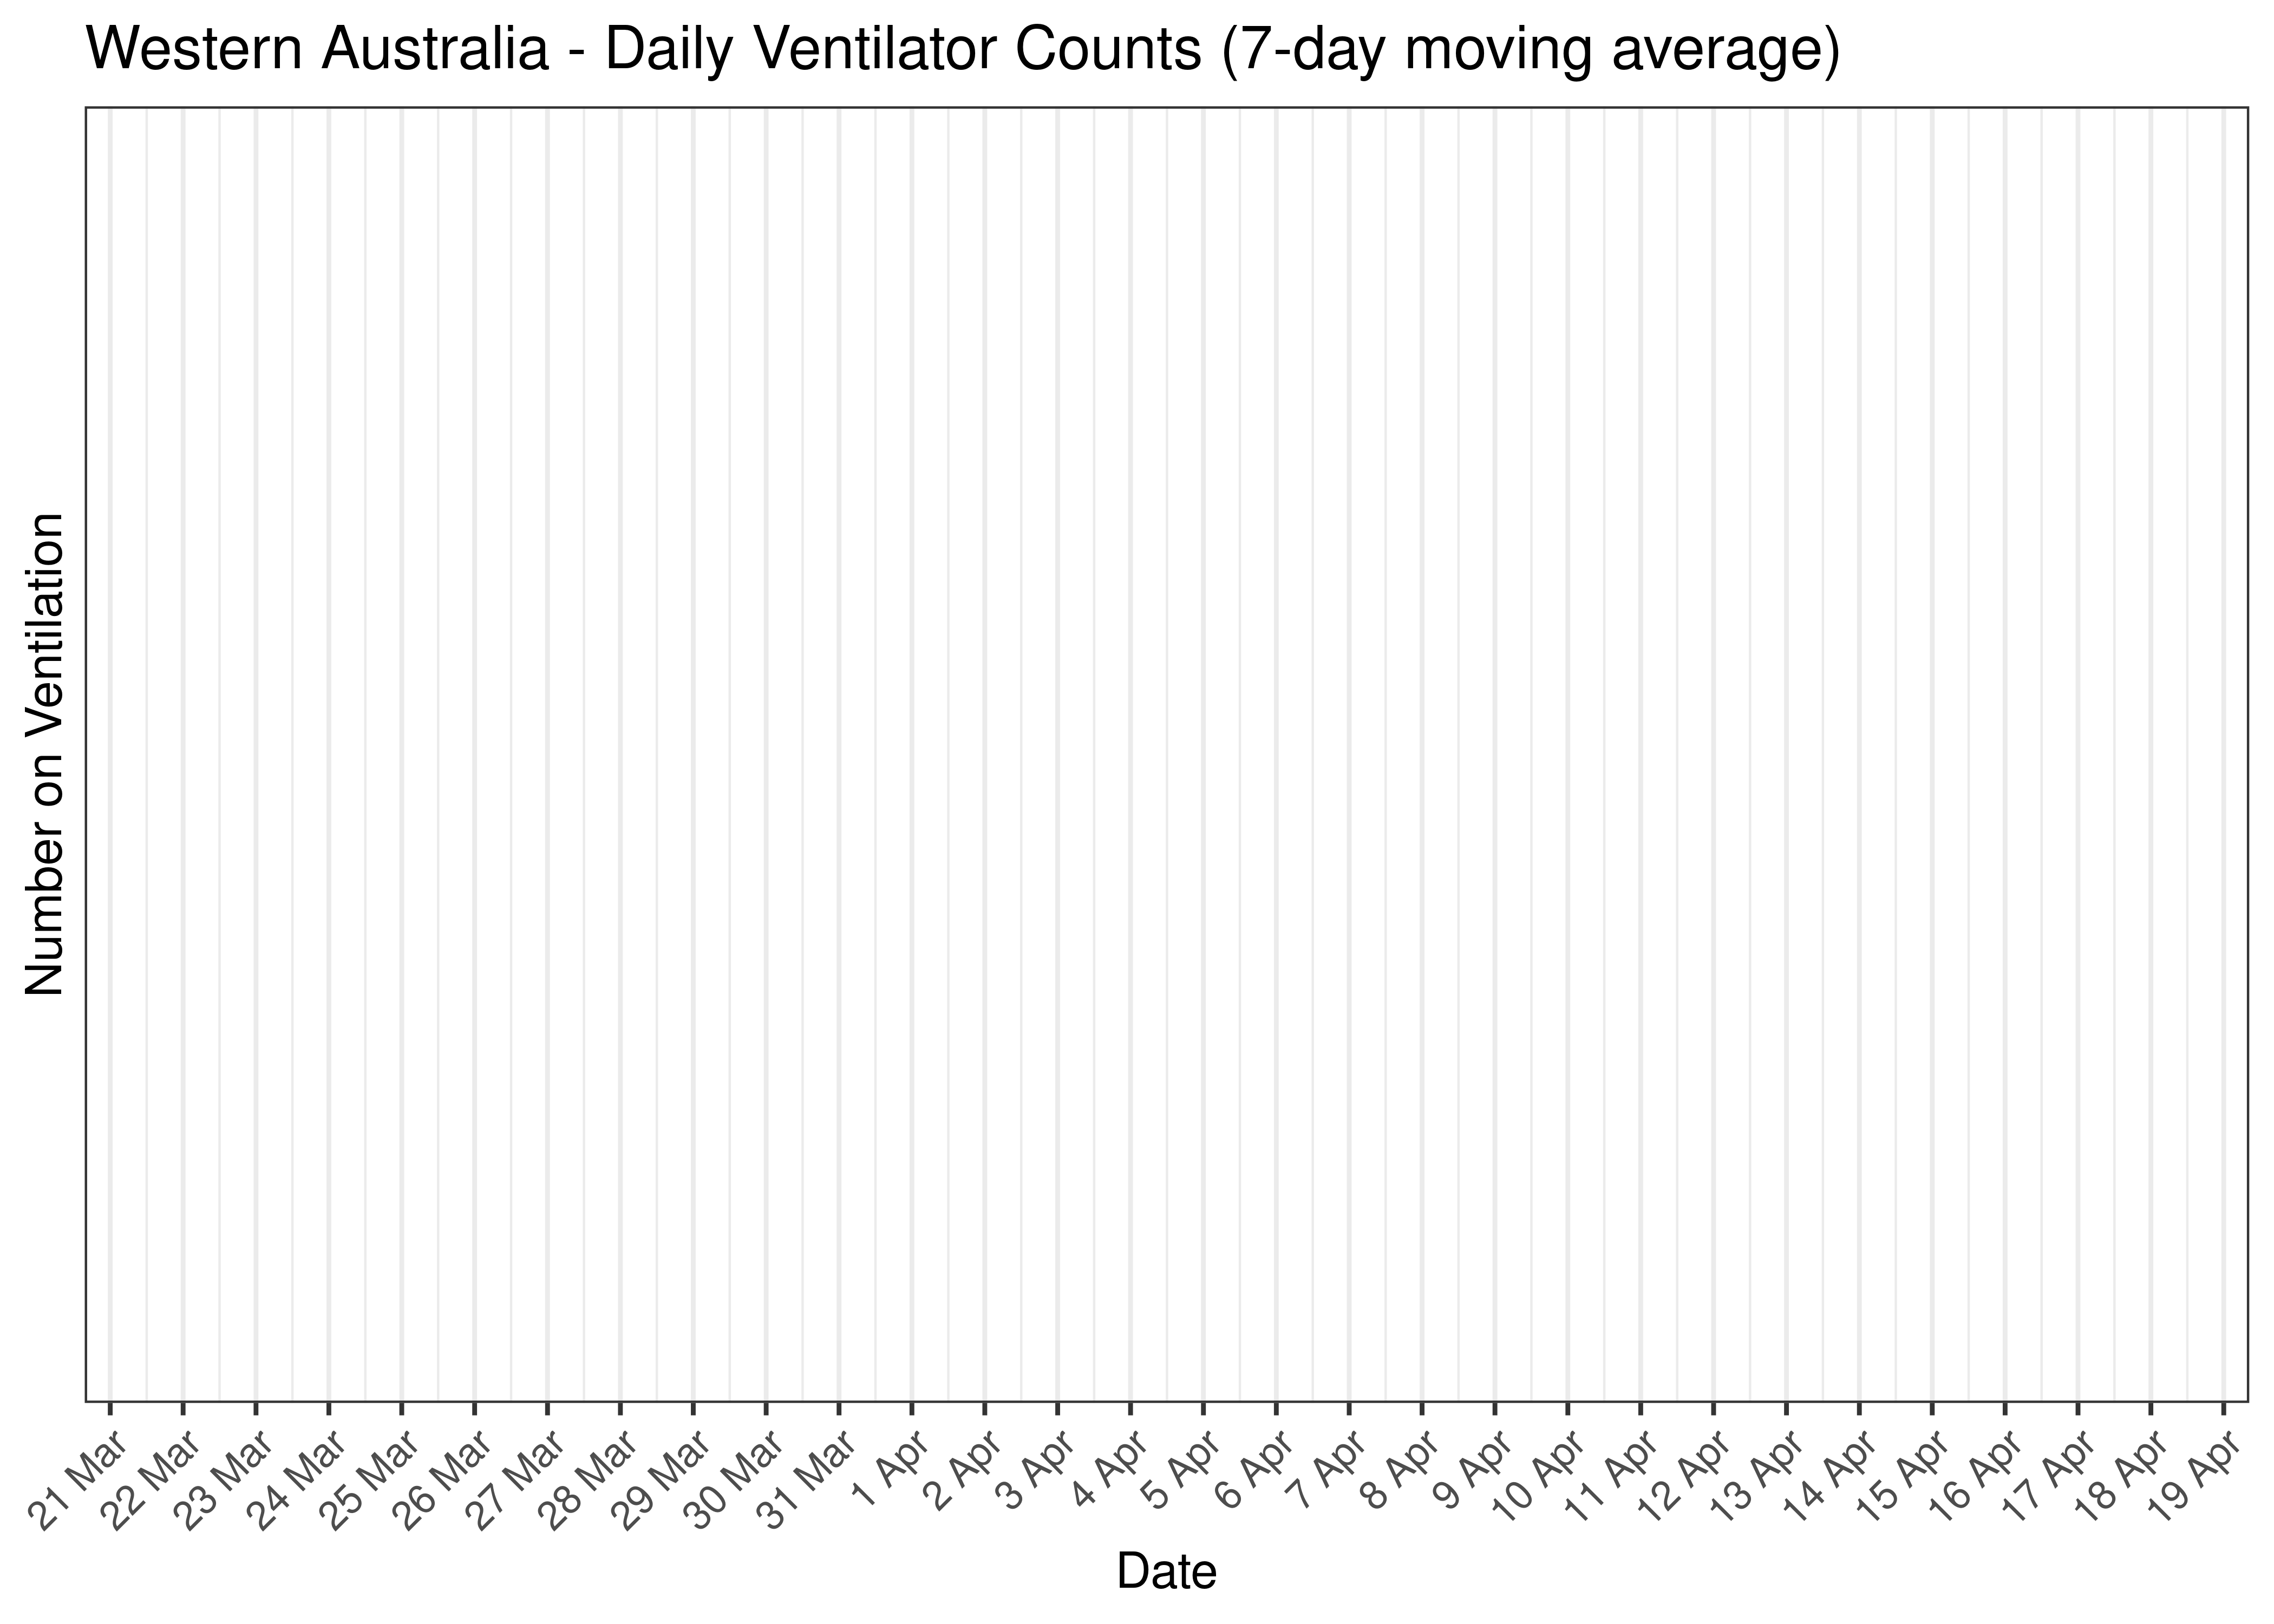 Western Australia - Daily Ventilator Counts for Last 30-days (7-day moving average)